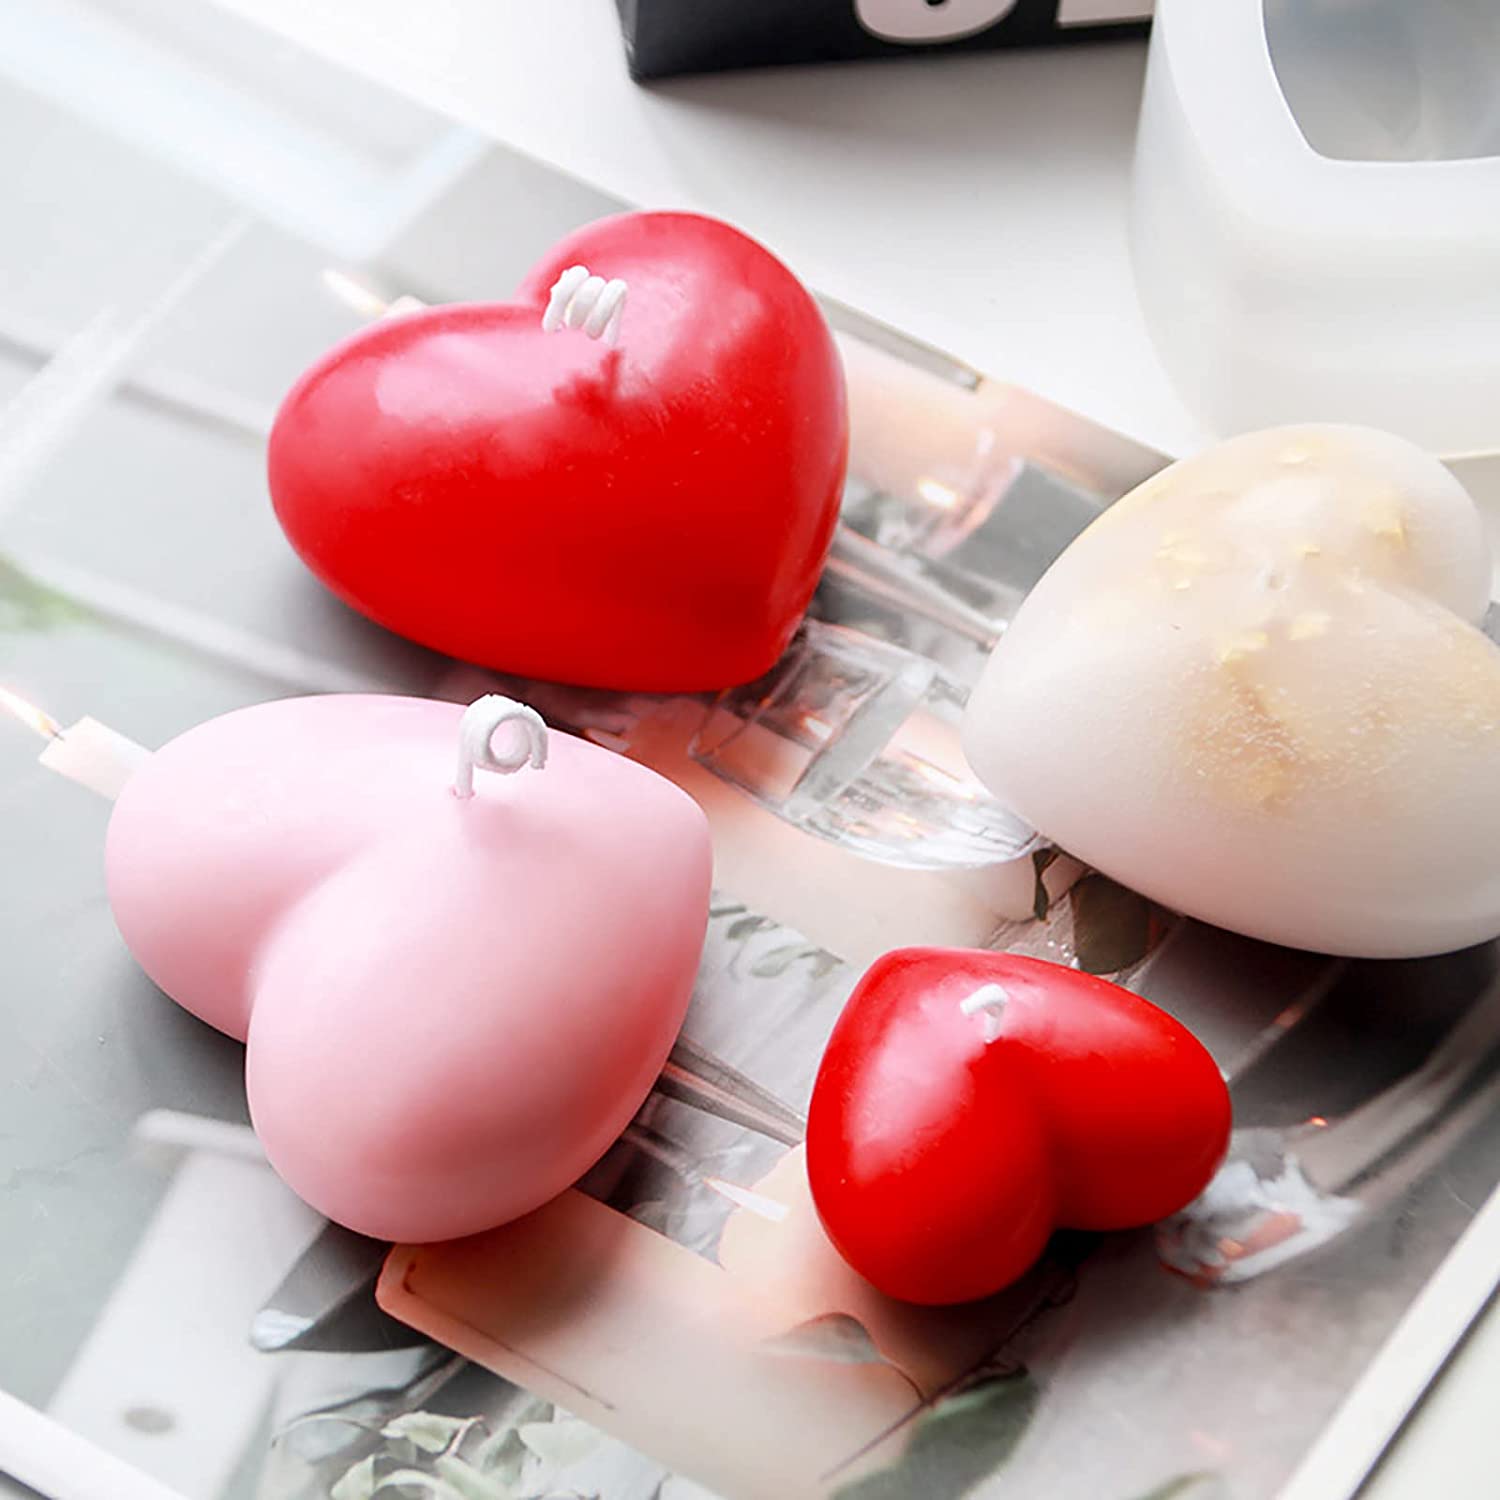 ONNPNN 2 Pieces Valentine's Day Soap Molds, 3D Heart Shape Holding Hands  Silicone Mold, DIY Heart-Shaped Fondant Mould, Handmade Lovers Ornaments